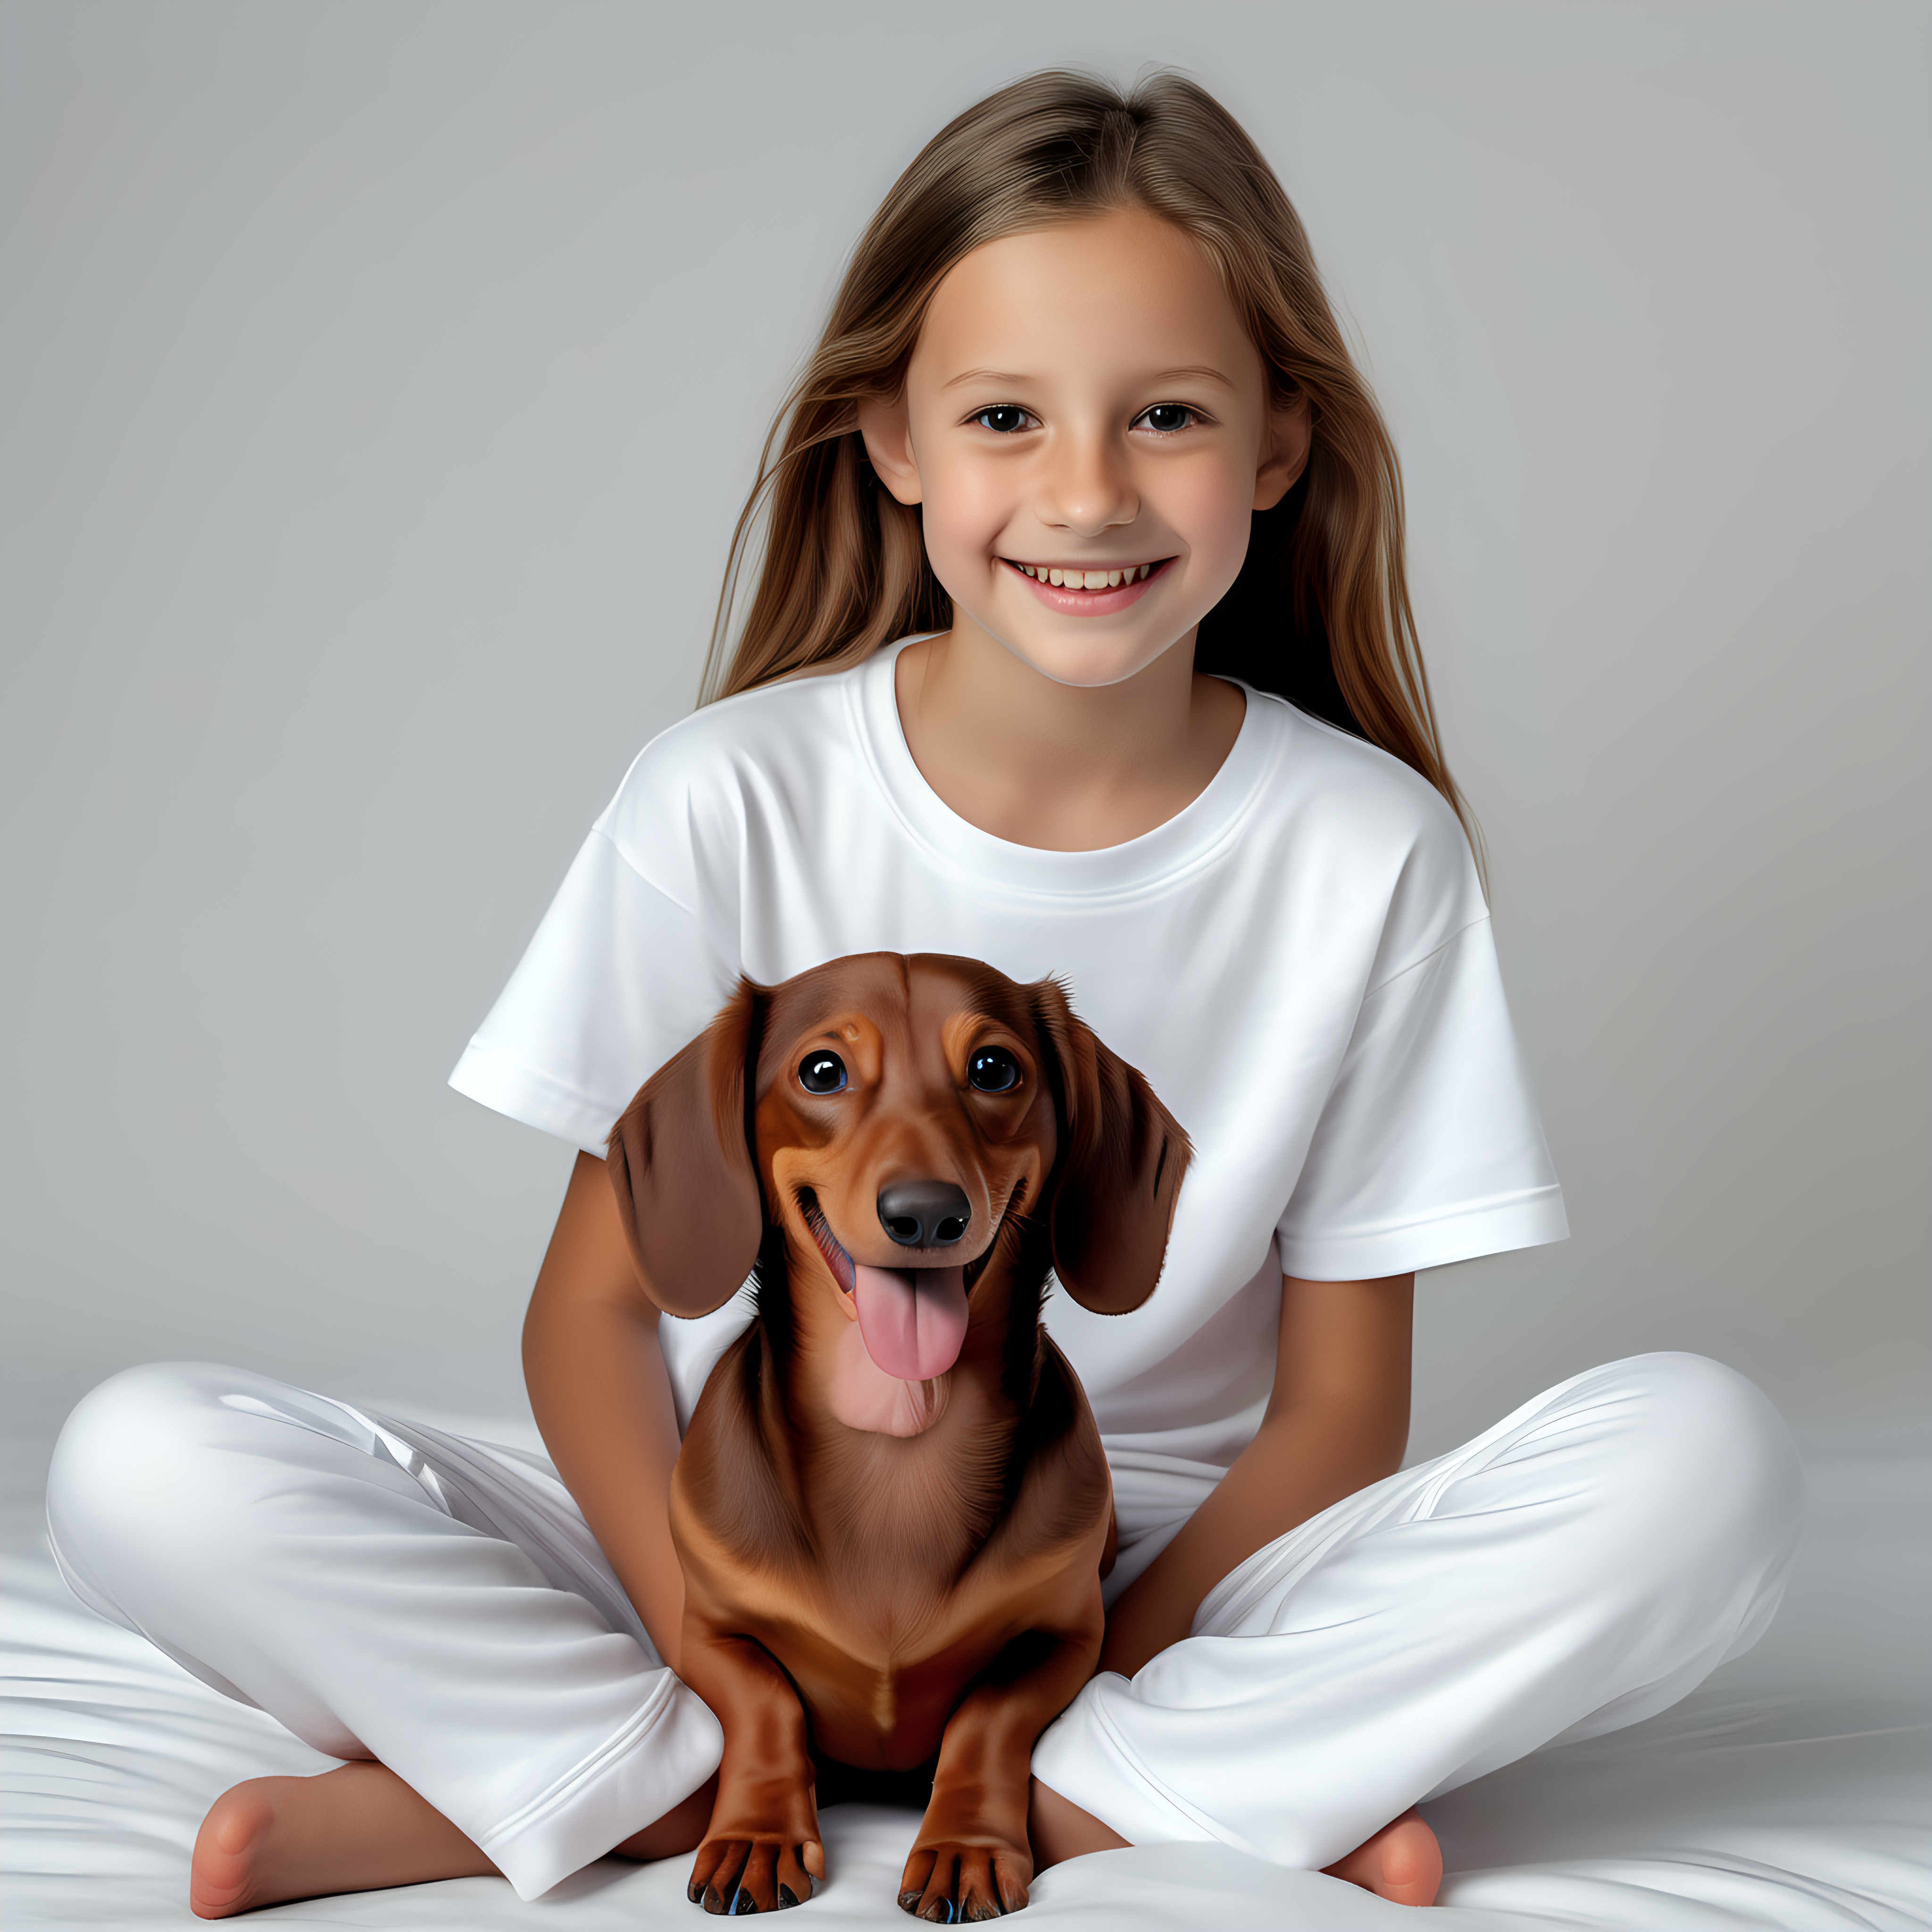 “Perfect Facial Features photo of a smiling 10 year old girl sitting  in  white cotton tshirt pyjama with no print, long  tight cuff sleeves, loose long pants) ,surrounded by wienerdogs, no background, hyper realistic, ideal face template, HD, happy, Fujifilm X-T3, 1/1250sec at f/2.8, ISO 160, 84mm”